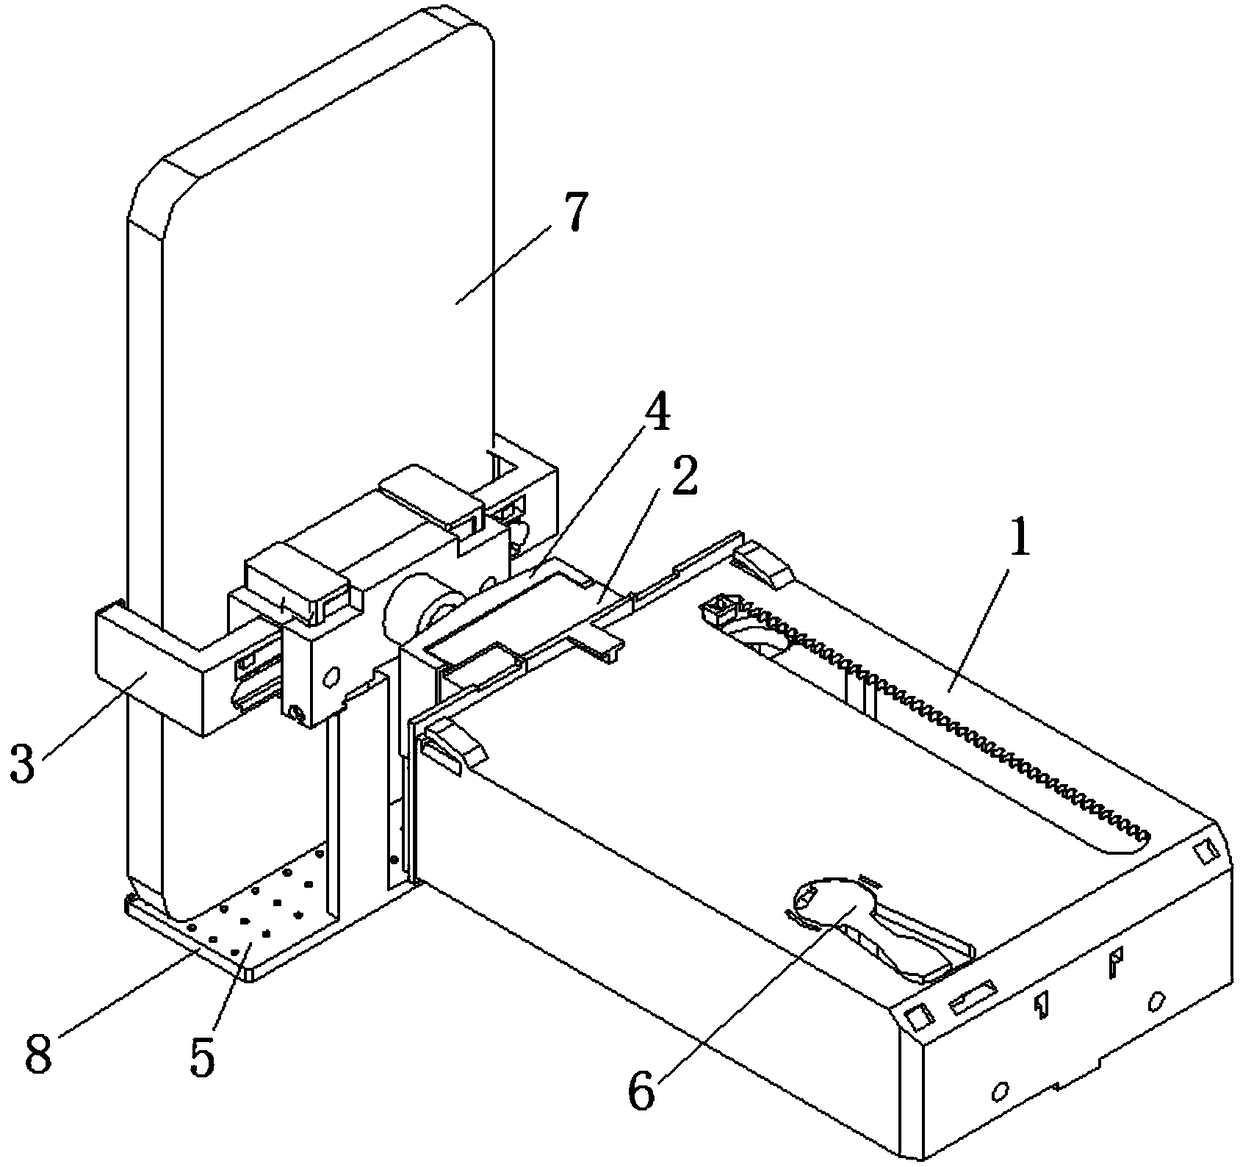 A concealed vehicle-mounted mobile phone mounting bracket